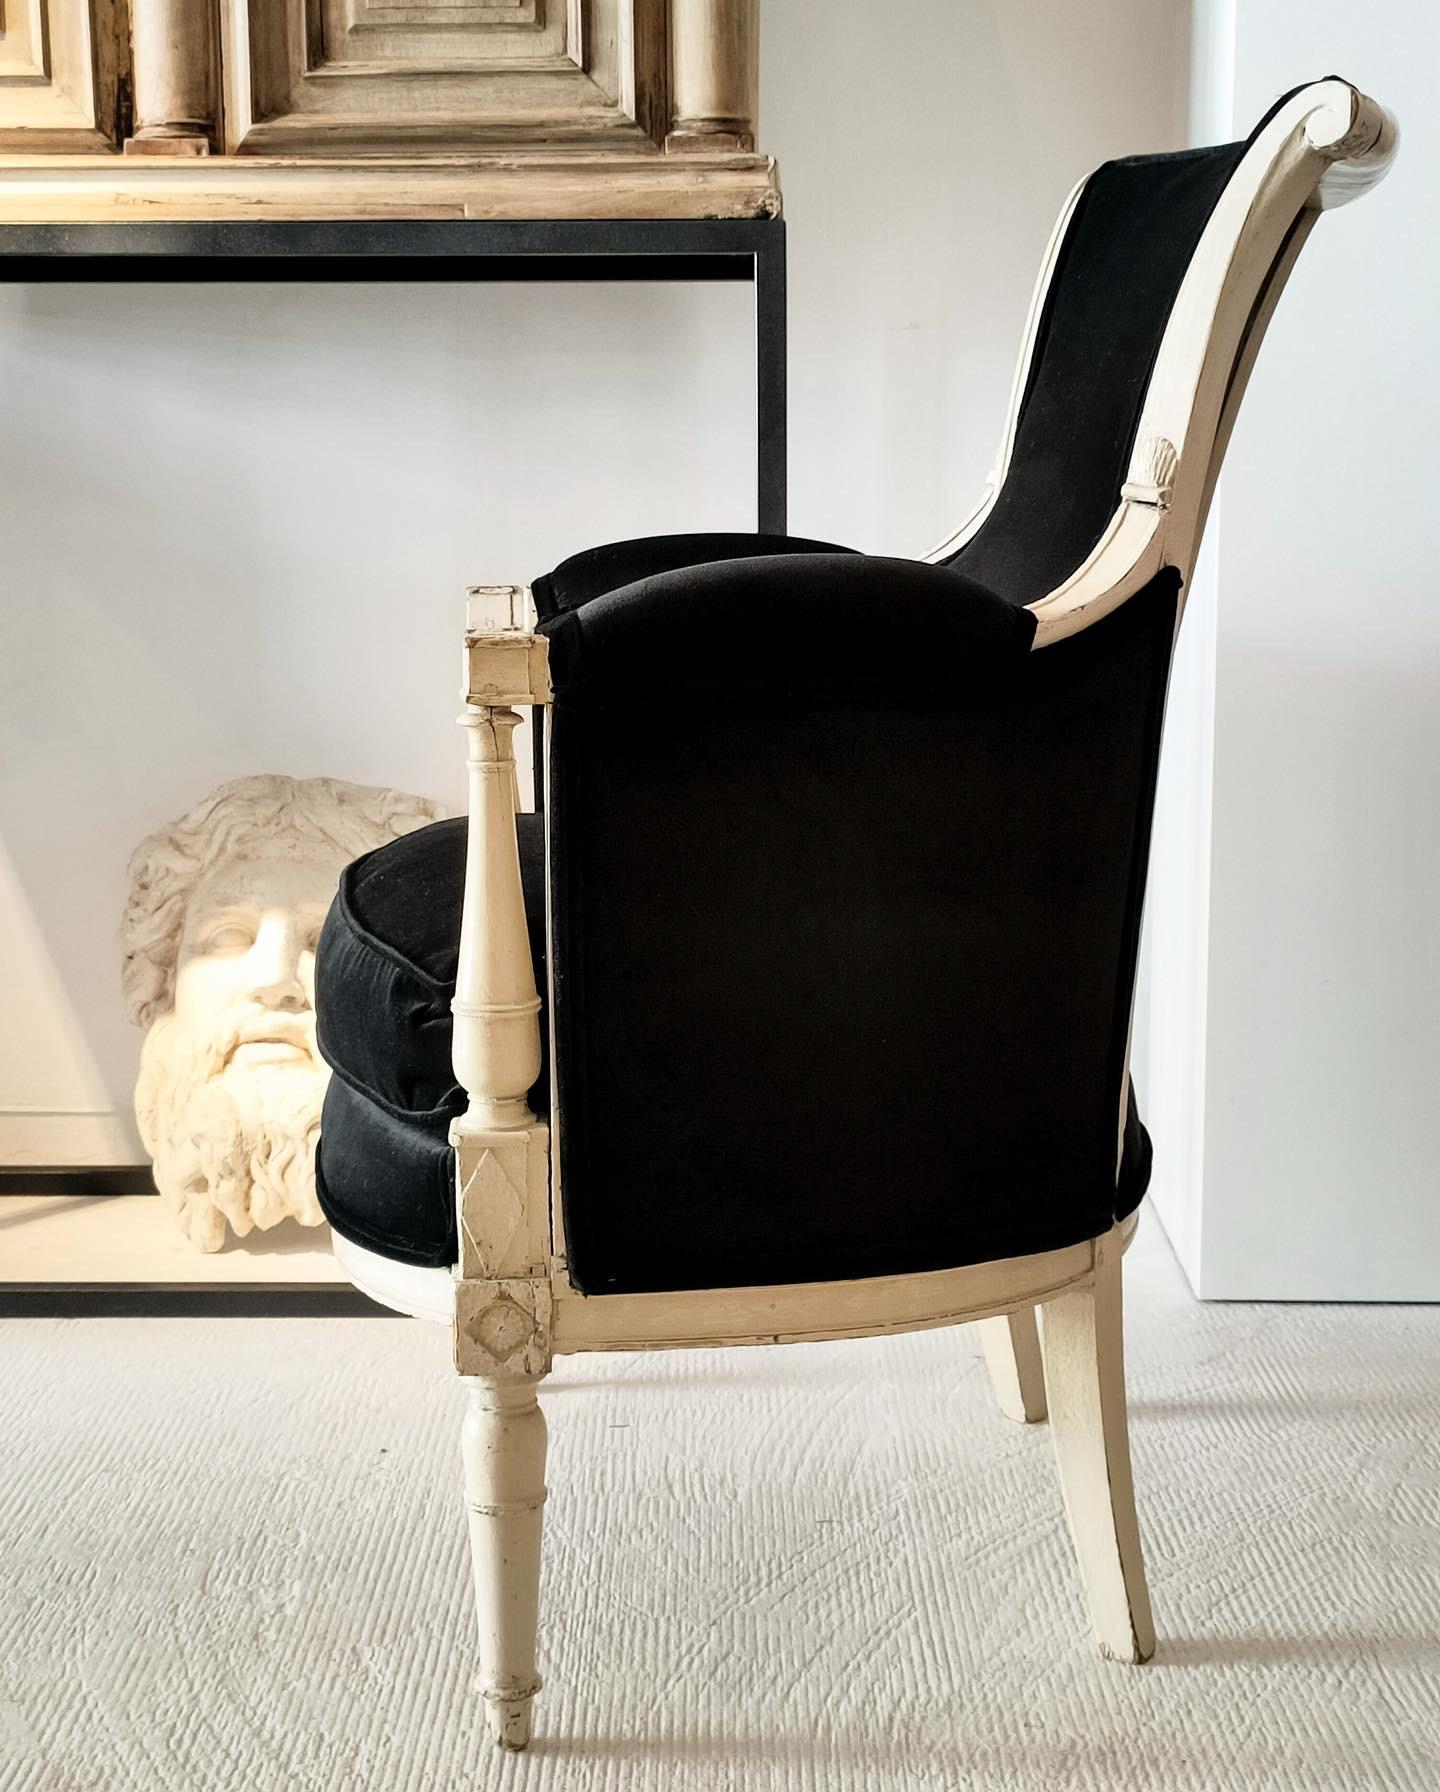 Antique 18th Century French Directoire armchair bergere.
It’s made in beech wood and oak lacquered in off-white and upholstered in black velvet from the Gastón y Daniela house.
It is in perfect condition of use, since its structure has no damage